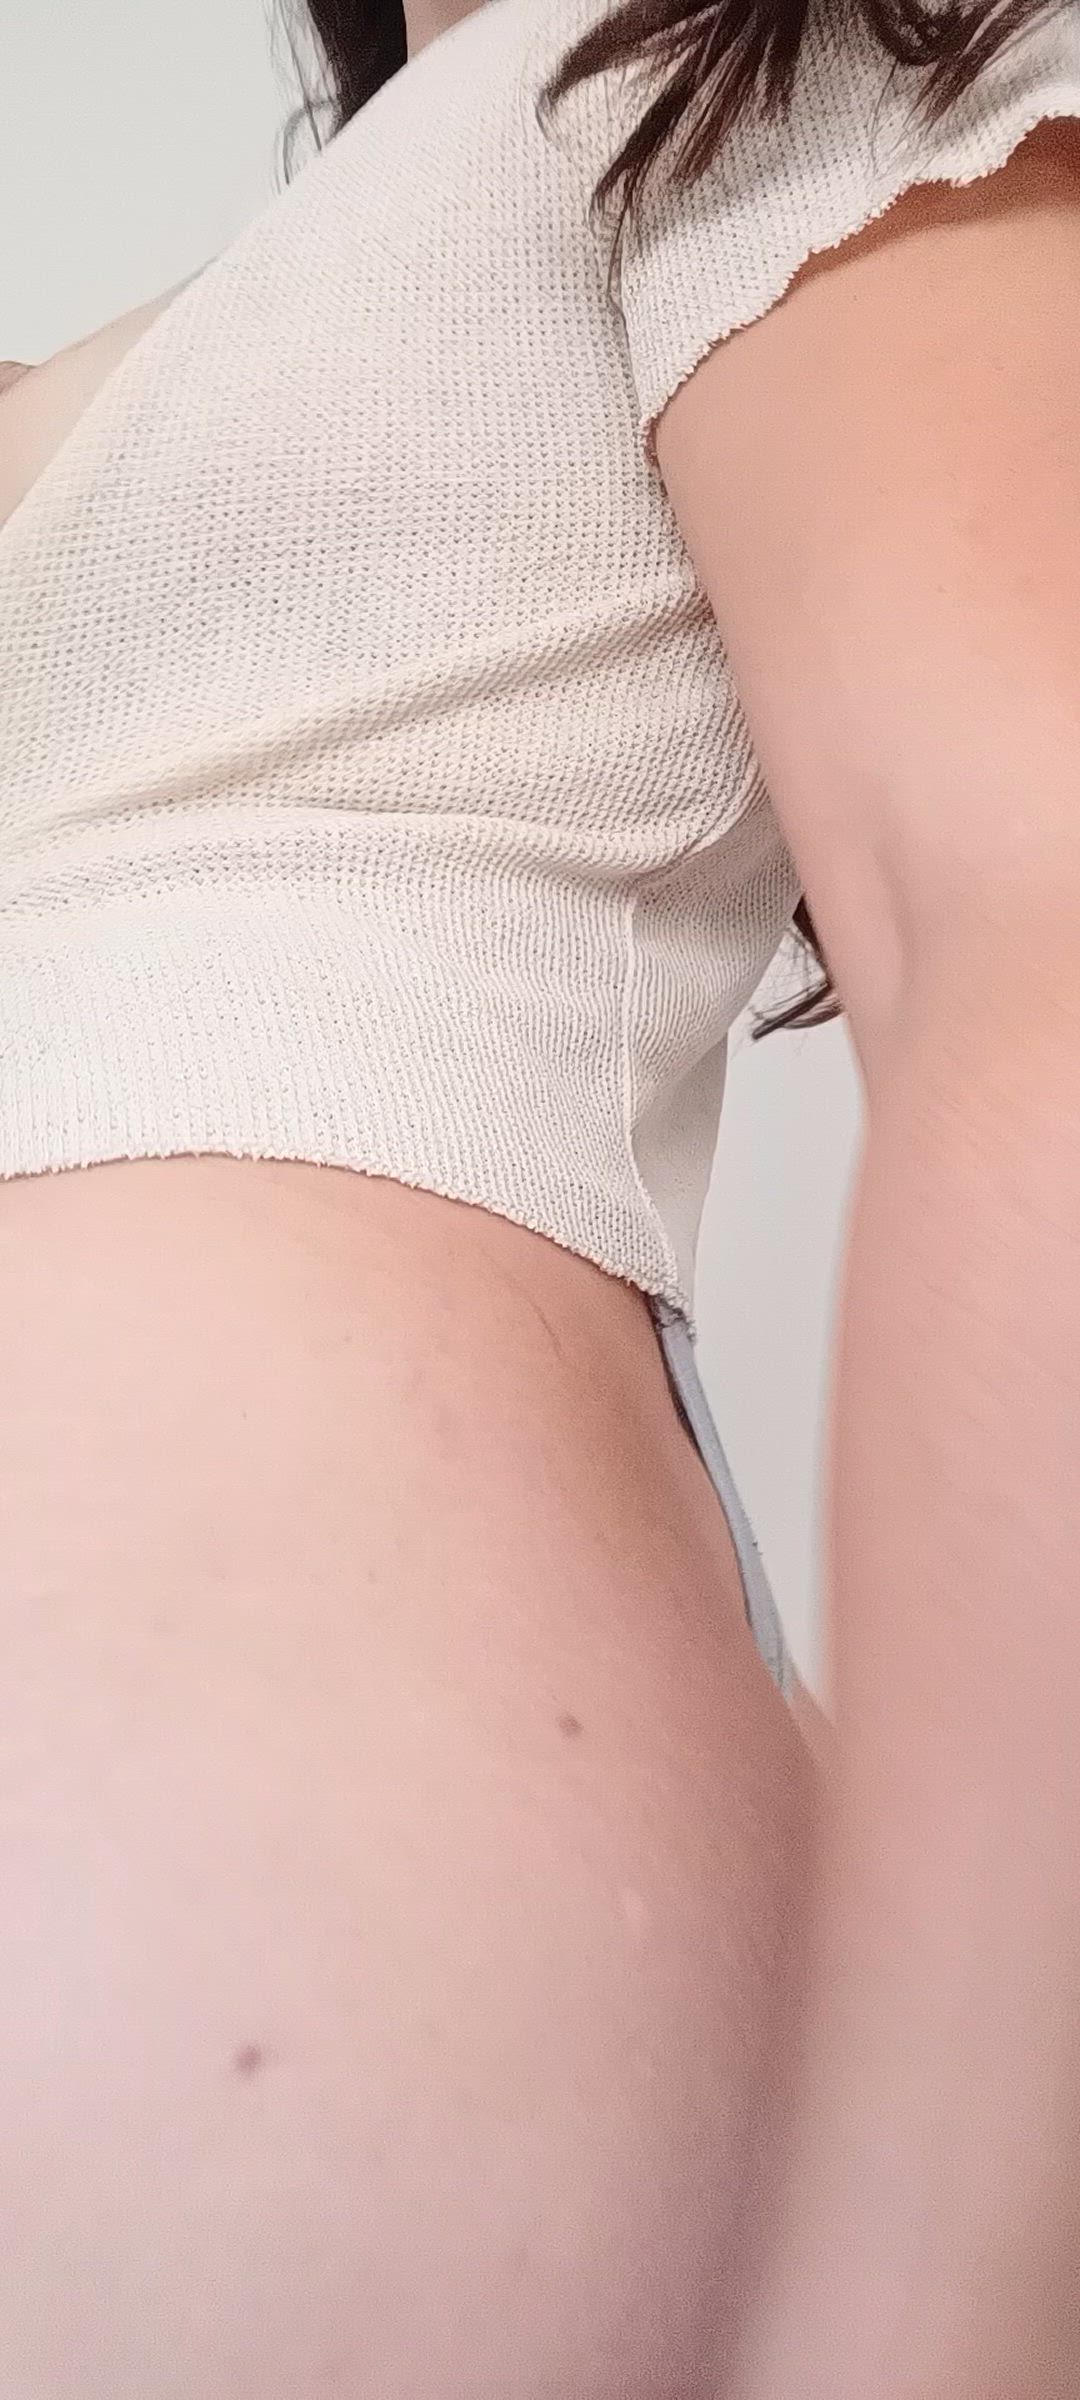 Ass porn video with onlyfans model Eva <strong>@pinkpussy95</strong>